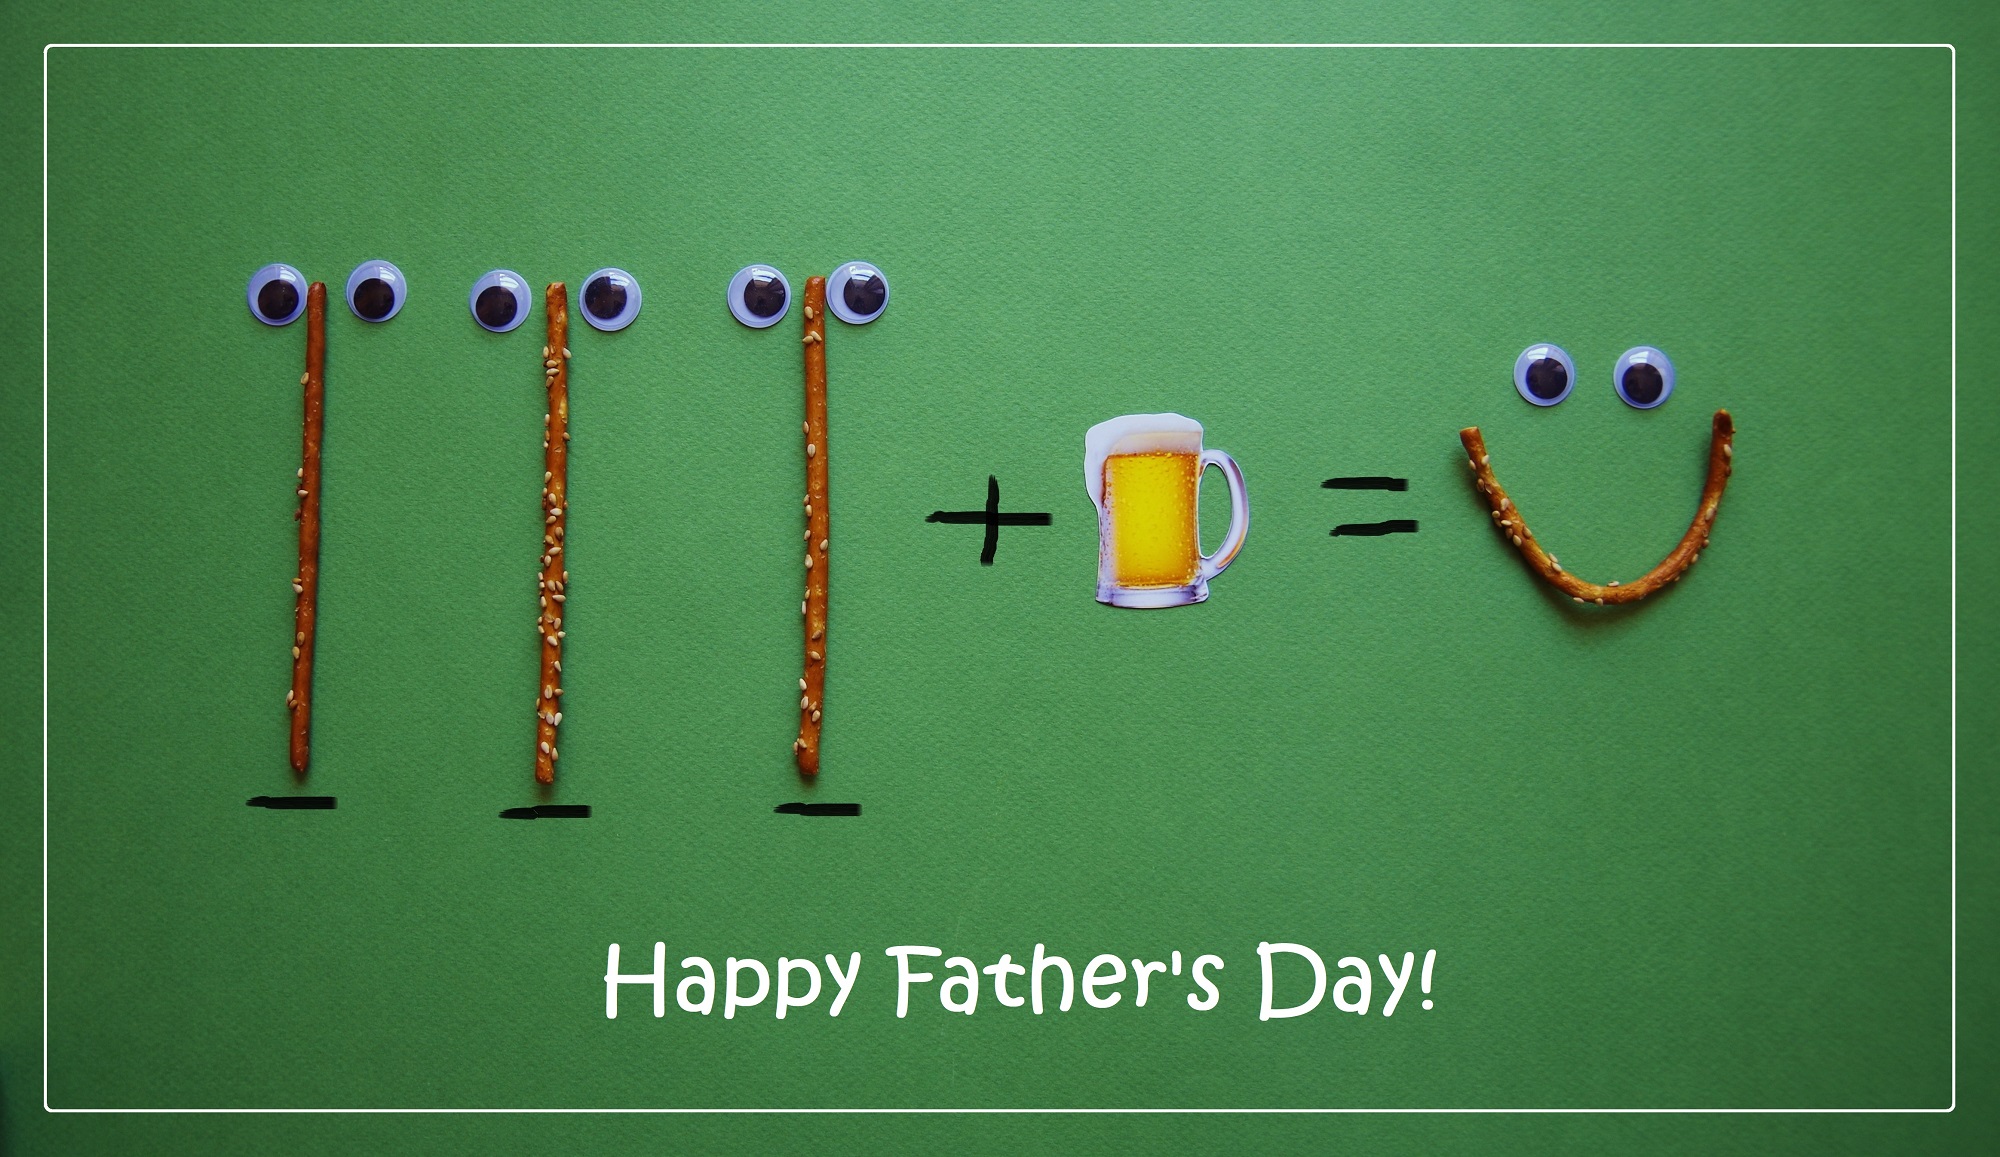 Happy Fathers's day!